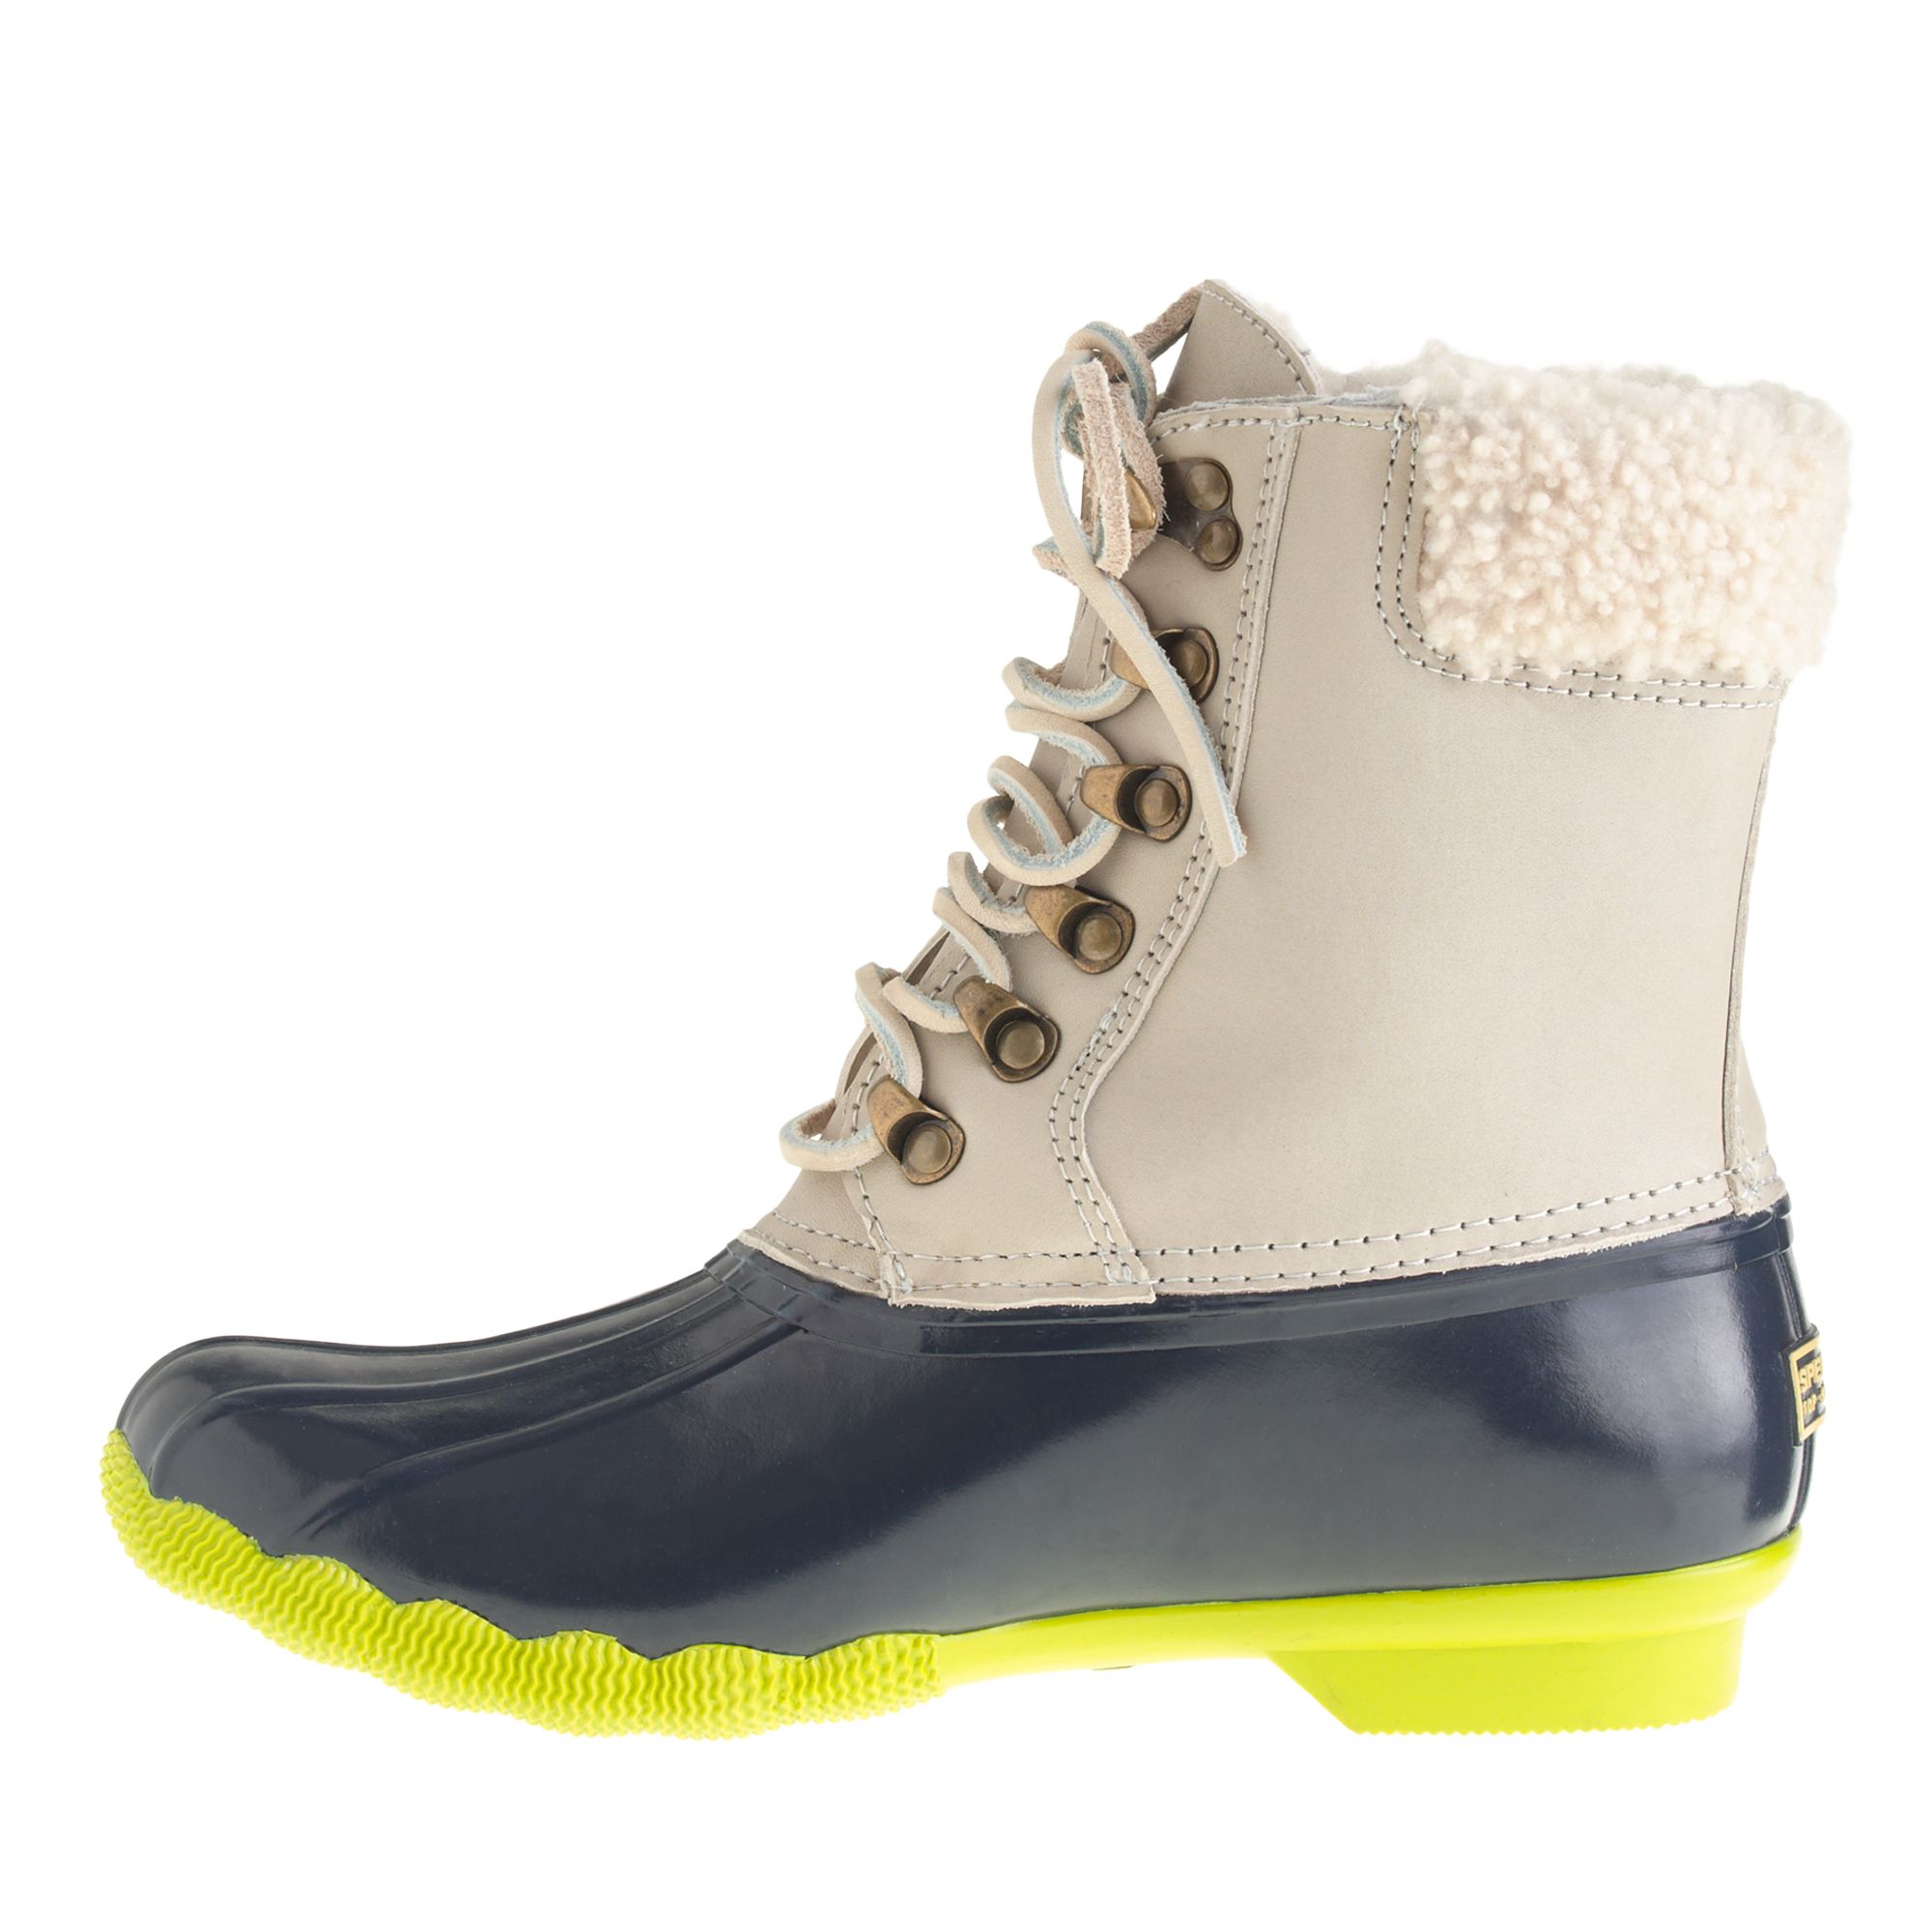 Lyst - Sperry Top-Sider Sperry Topsider For Leather Shearwater Boots in ...